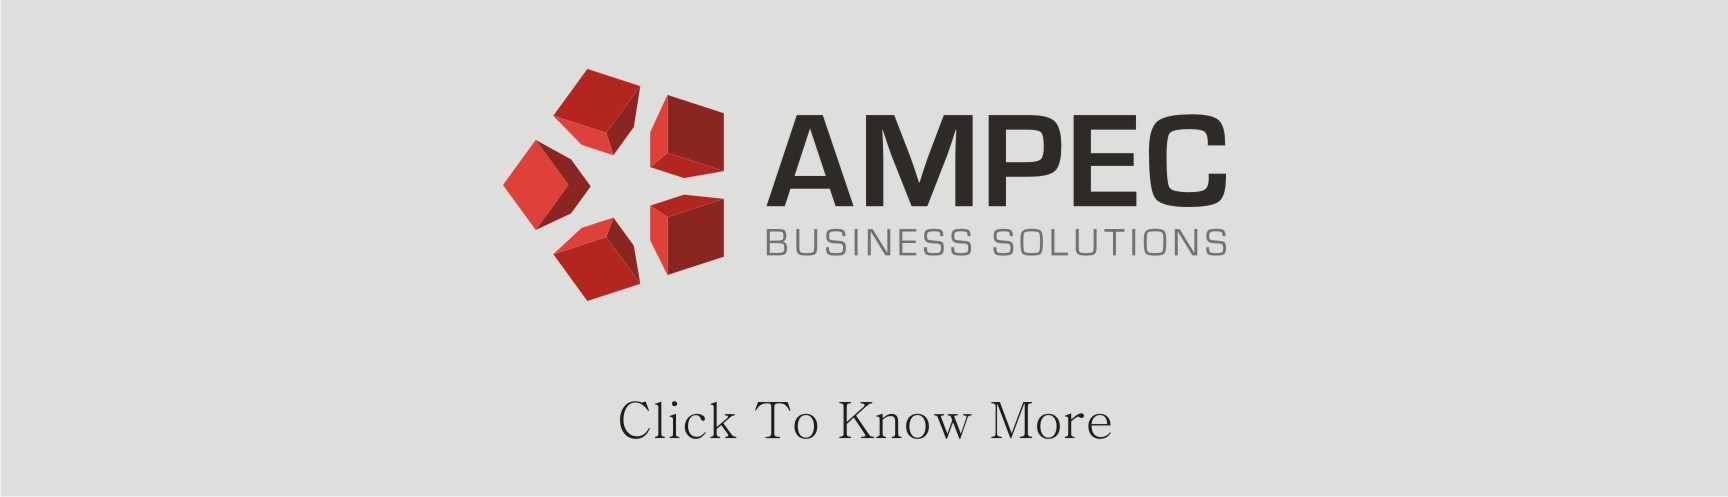 Ampec Business Solutions